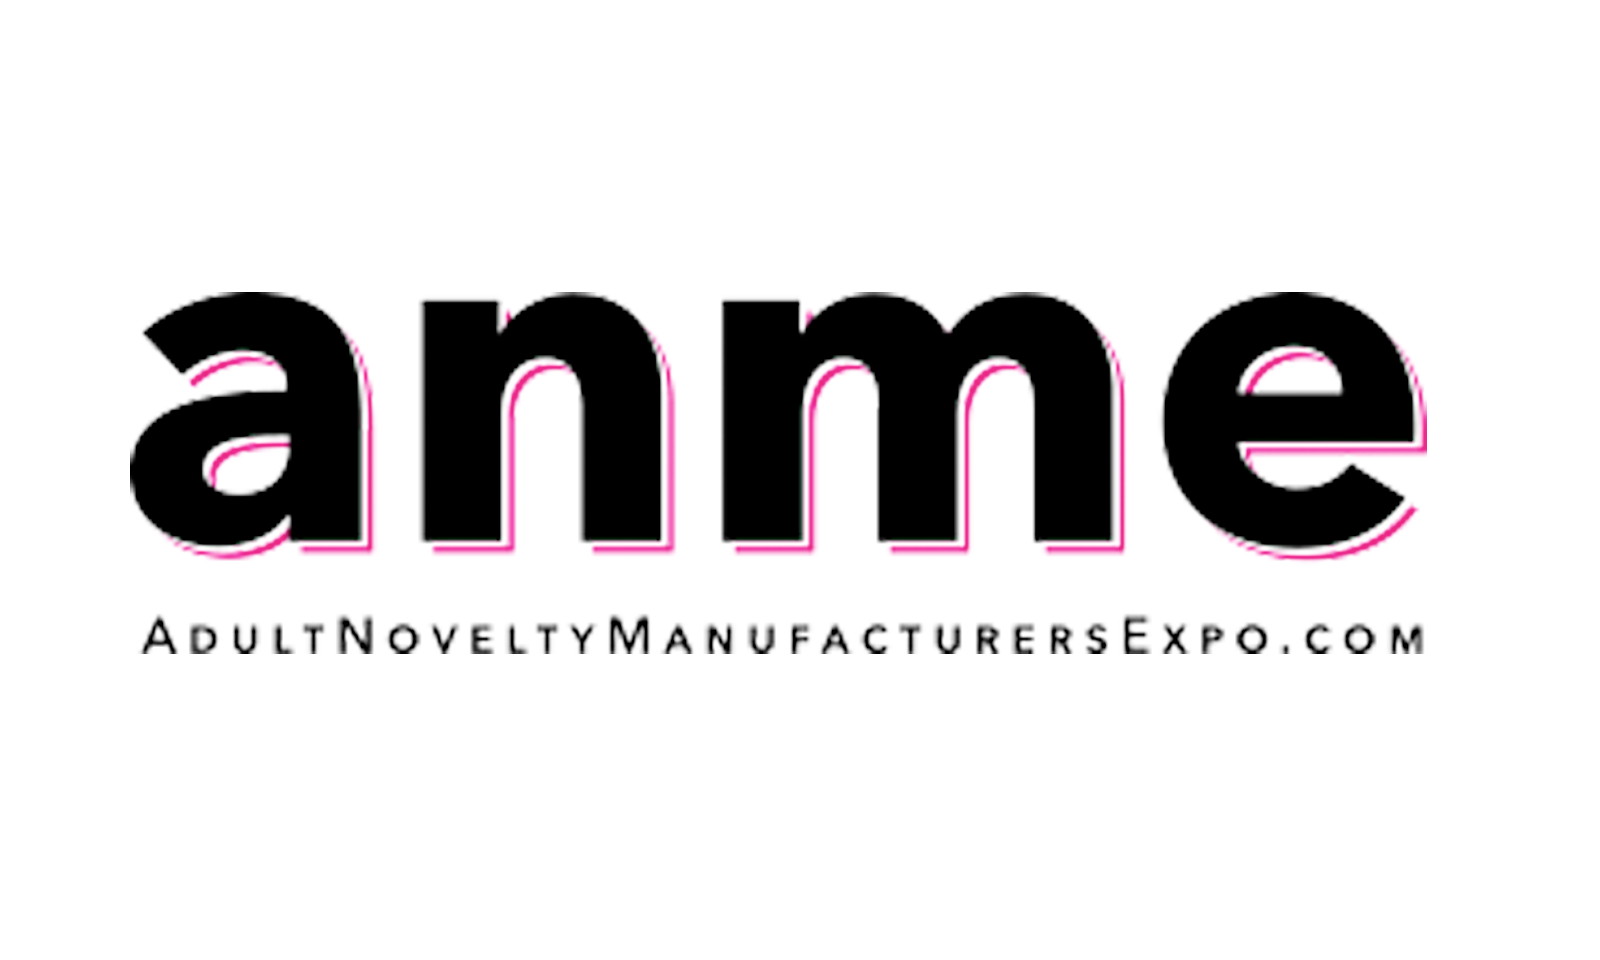 Organizers Report January 2019 ANME Show Sold Out